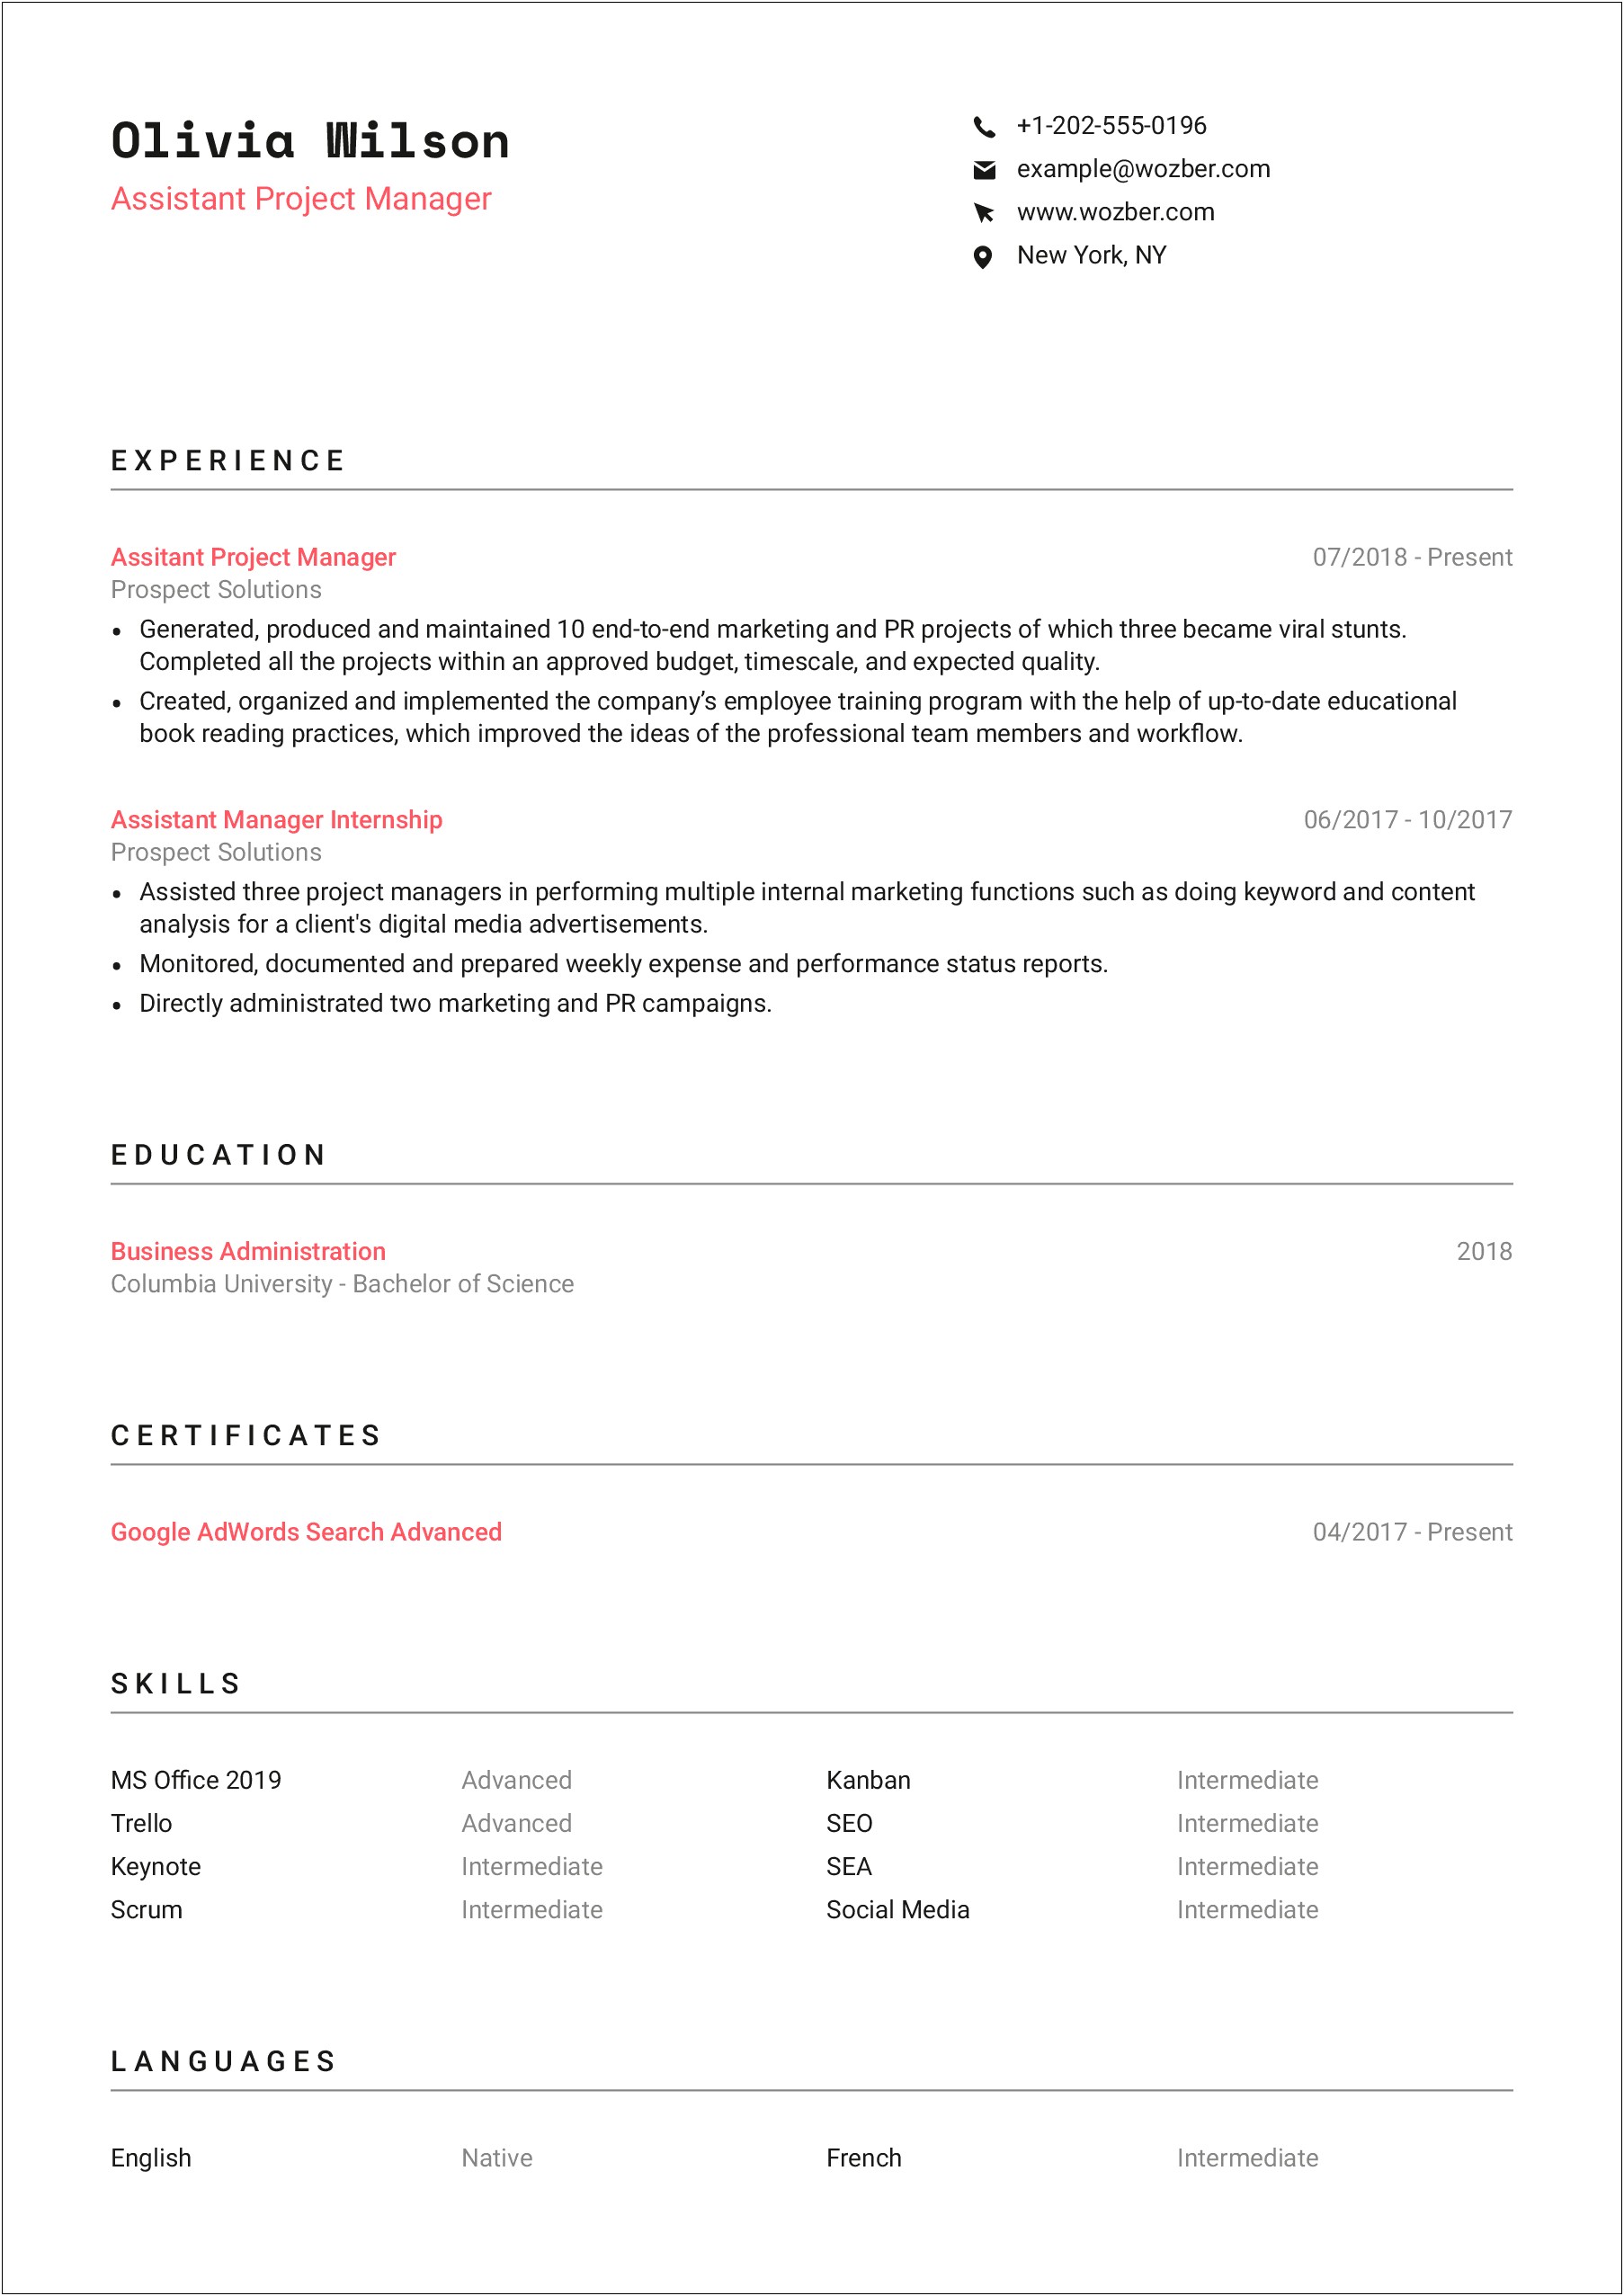 Resume Editor Jobs From Home